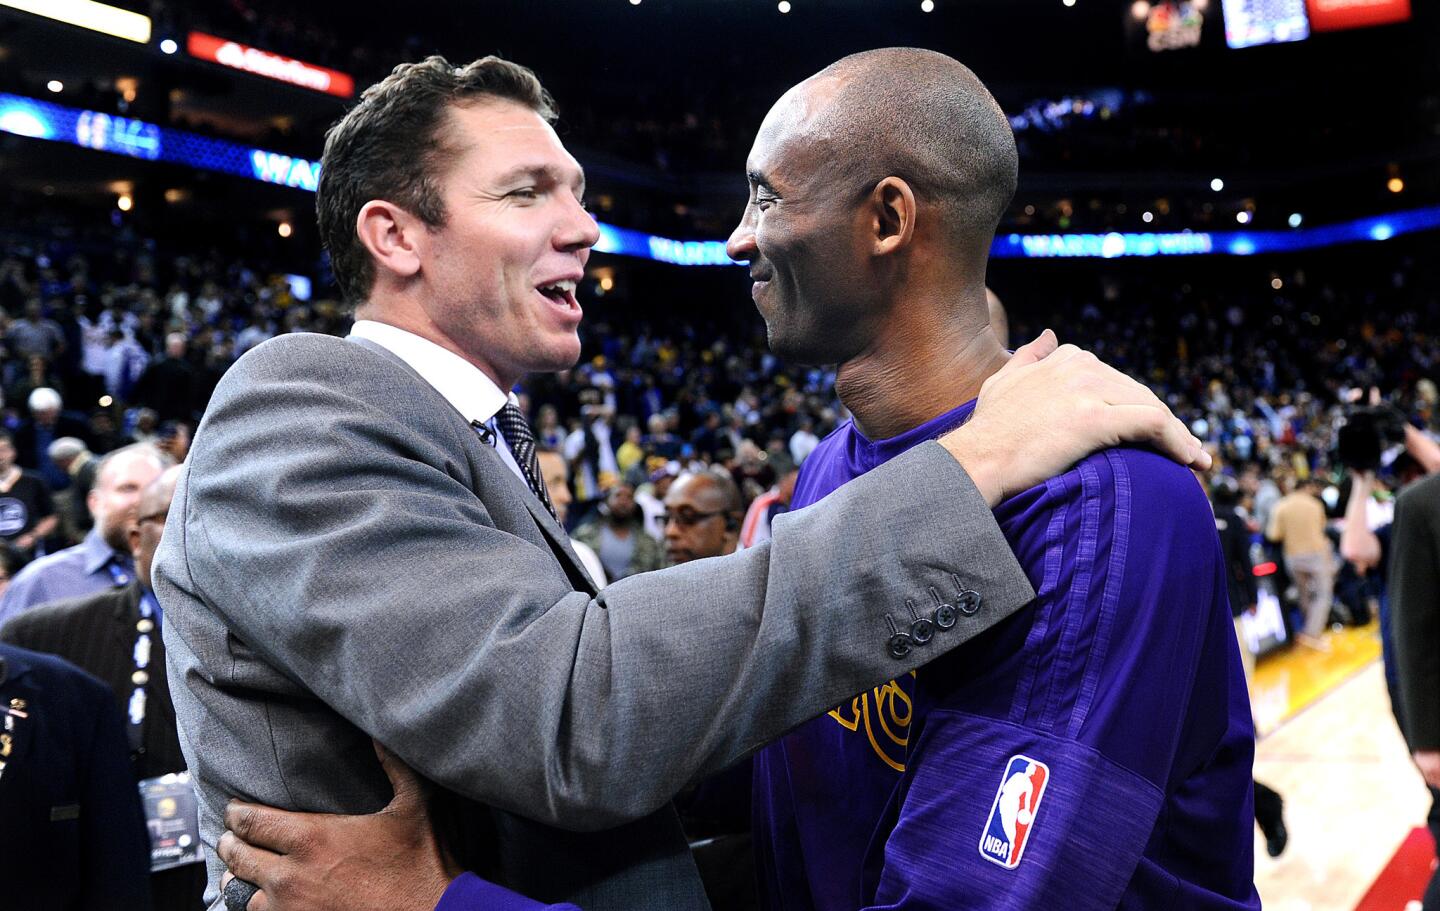 Kobe Bryant hugs former Lakers teammateand current Warriors assistant coach Luke Walton after a game in Oakland on Jan. 14, 2016.